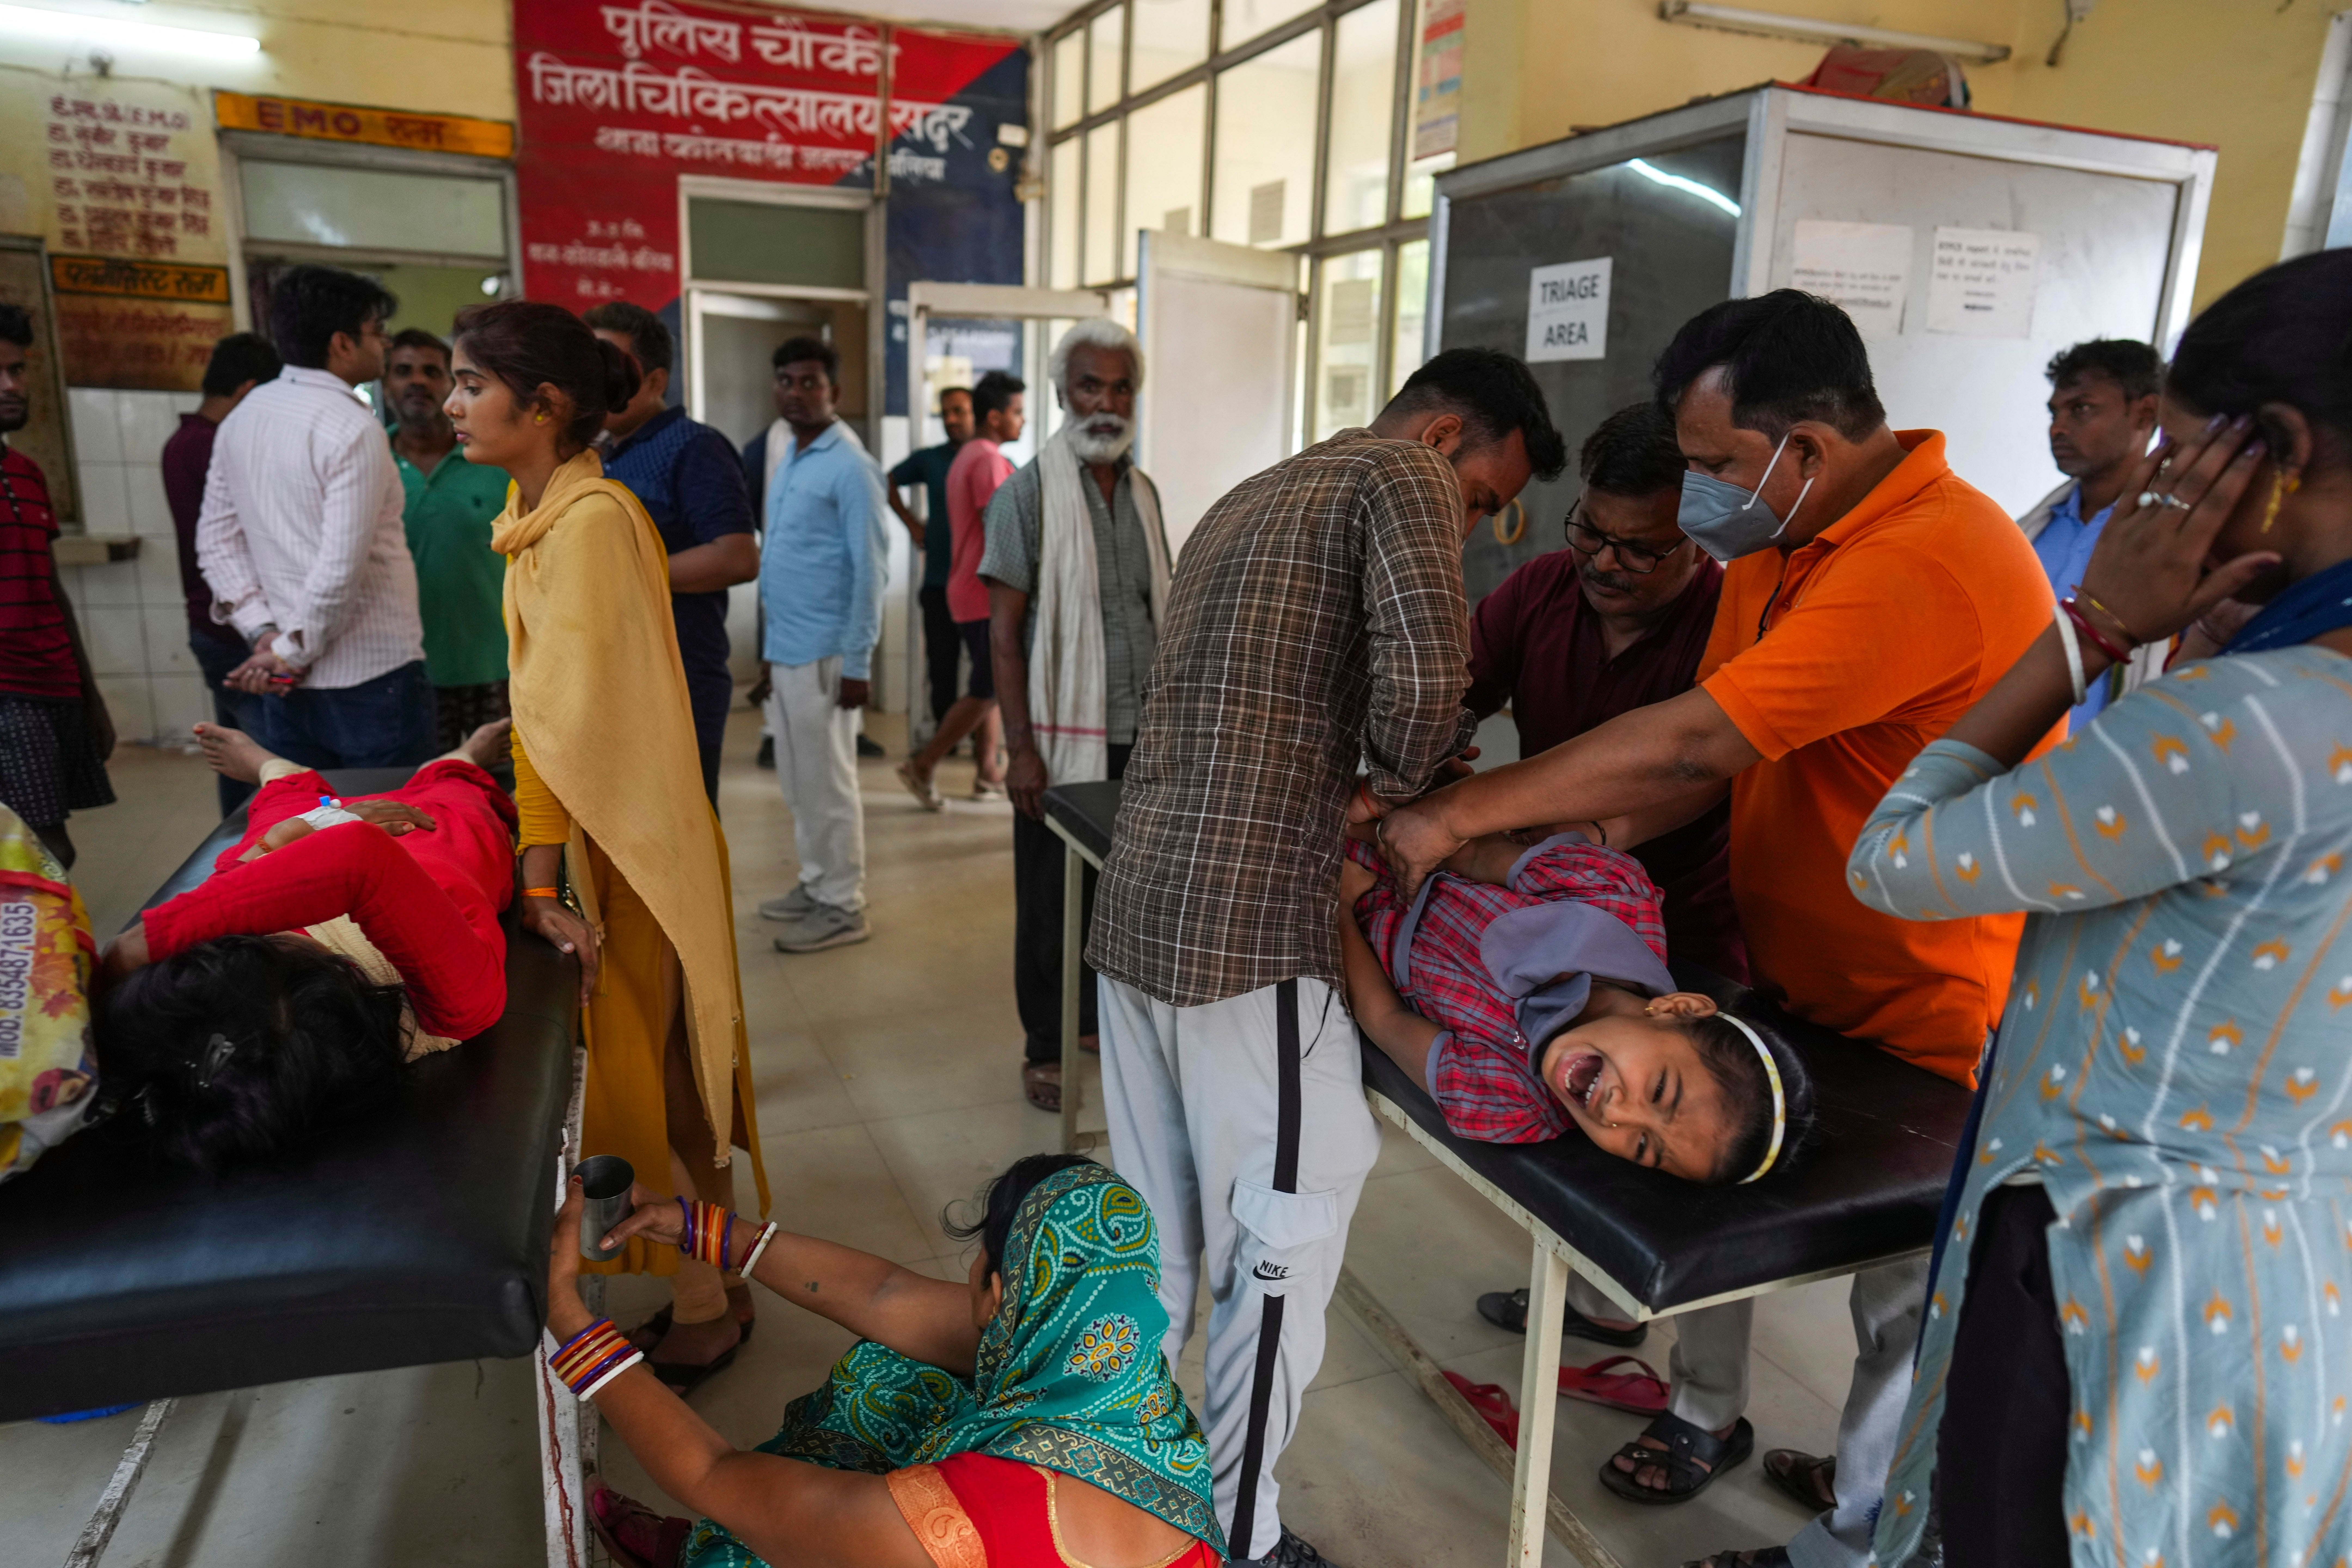 People suffering from heatstroke are treated in a hospital in Ballia in the northern Uttar Pradesh state